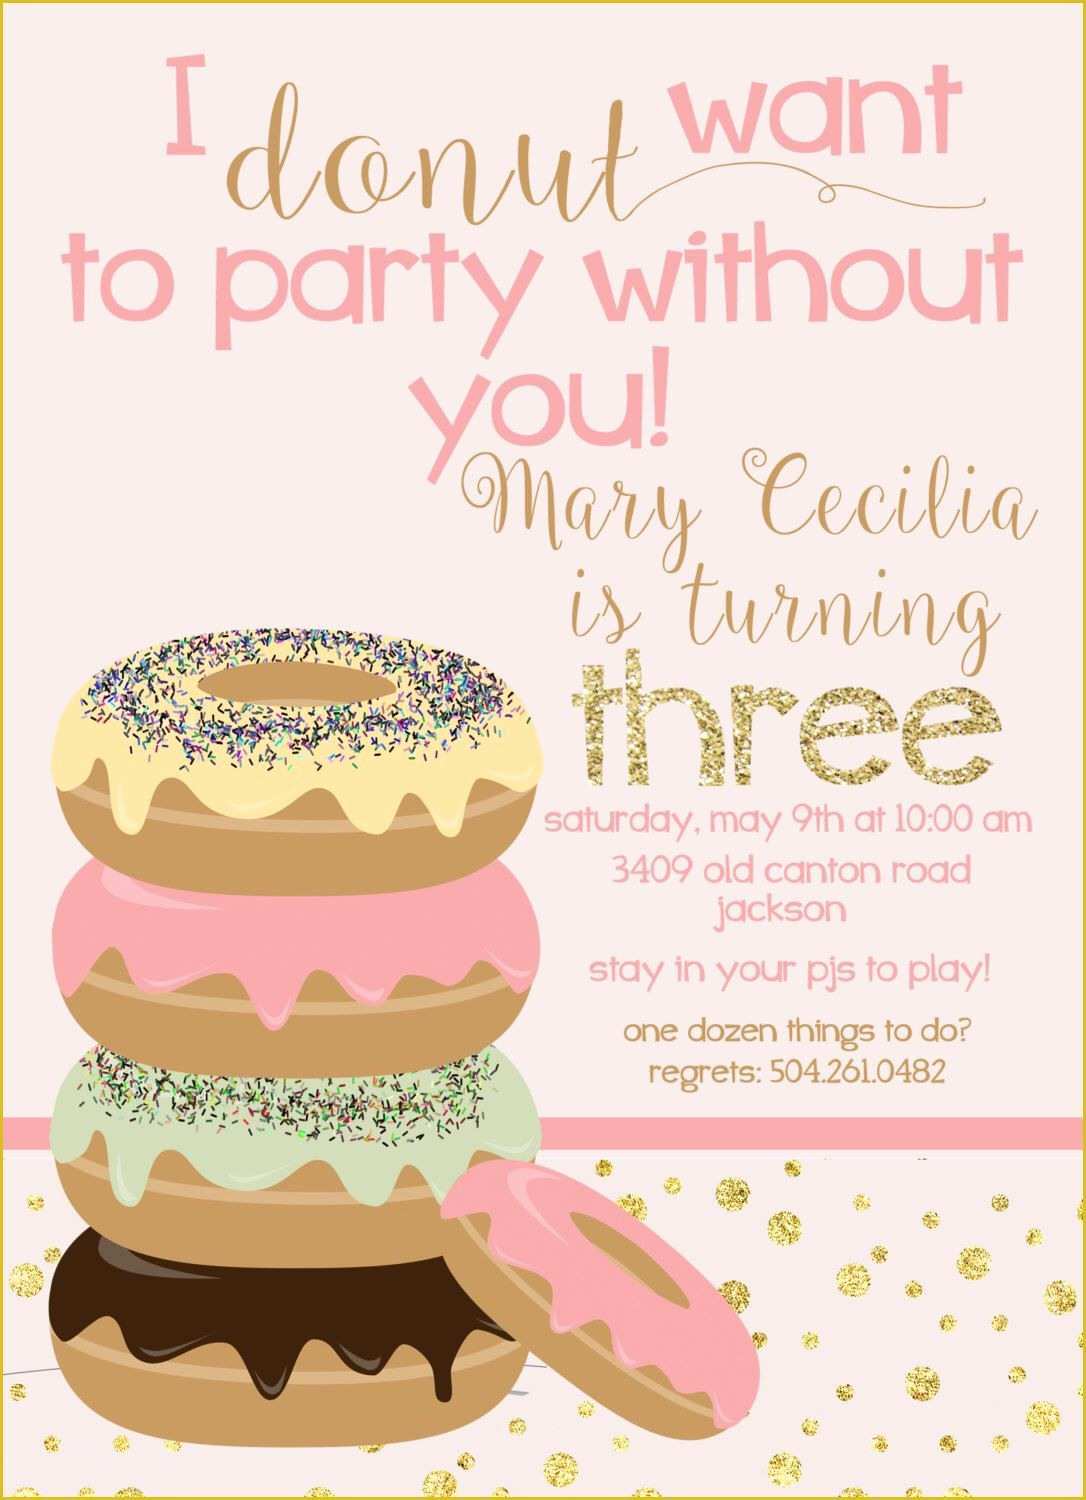 Donut Invitation Template Free Of Donut and Pjs Party Invitation by Ruffdraftpapers On Etsy